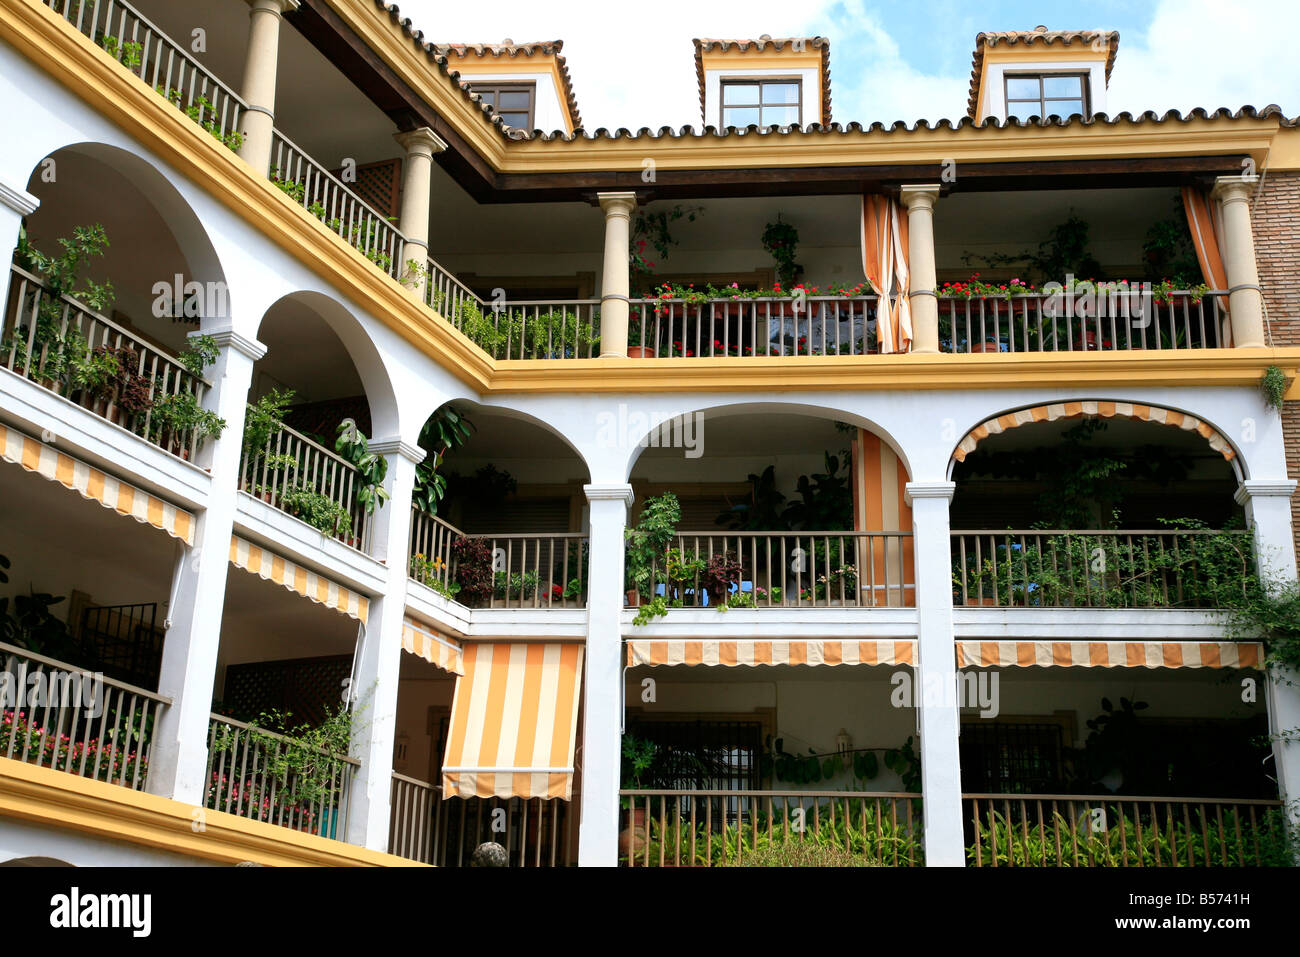 Apartments in Cordoba with green balconies and Moorish influenced architecture Stock Photo